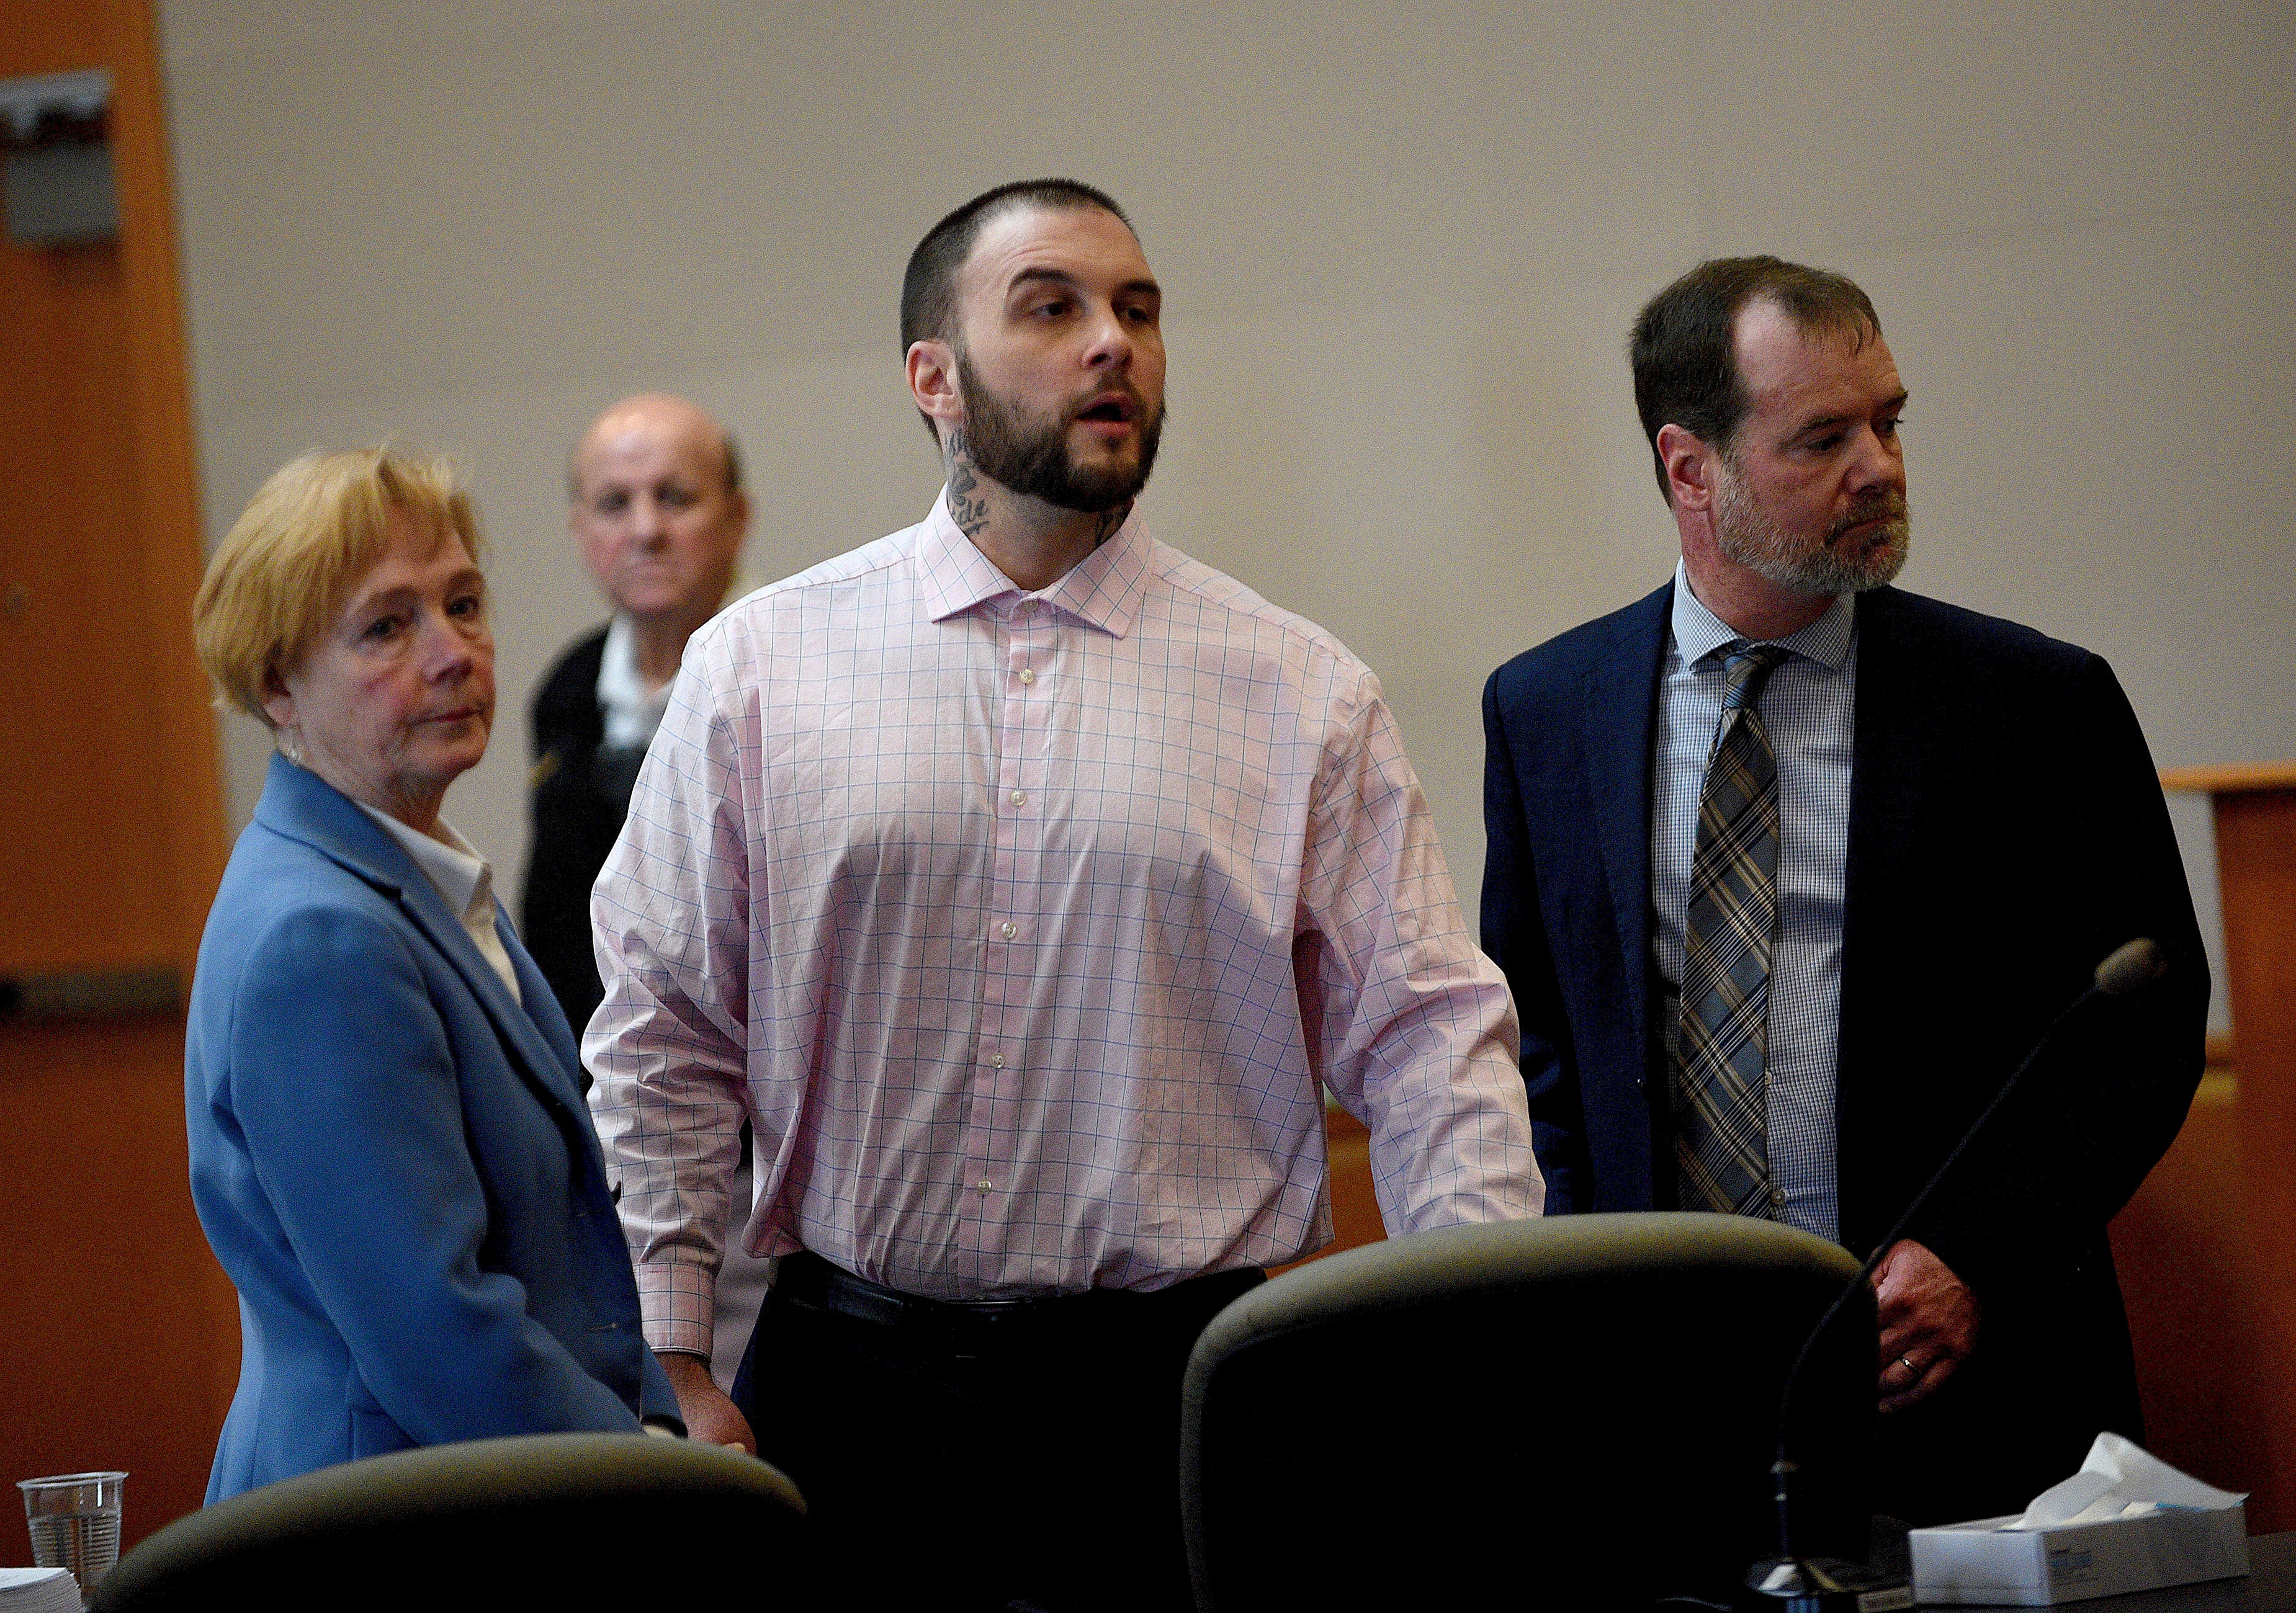 Adam Montgomery and his lawyers Caroline Smith and James Brooks watch as potential jurors enter the courtroom for jury selection ahead of his murder trial at Hillsborough County Superior Court in Manchester, New Hampshire, on Tuesday